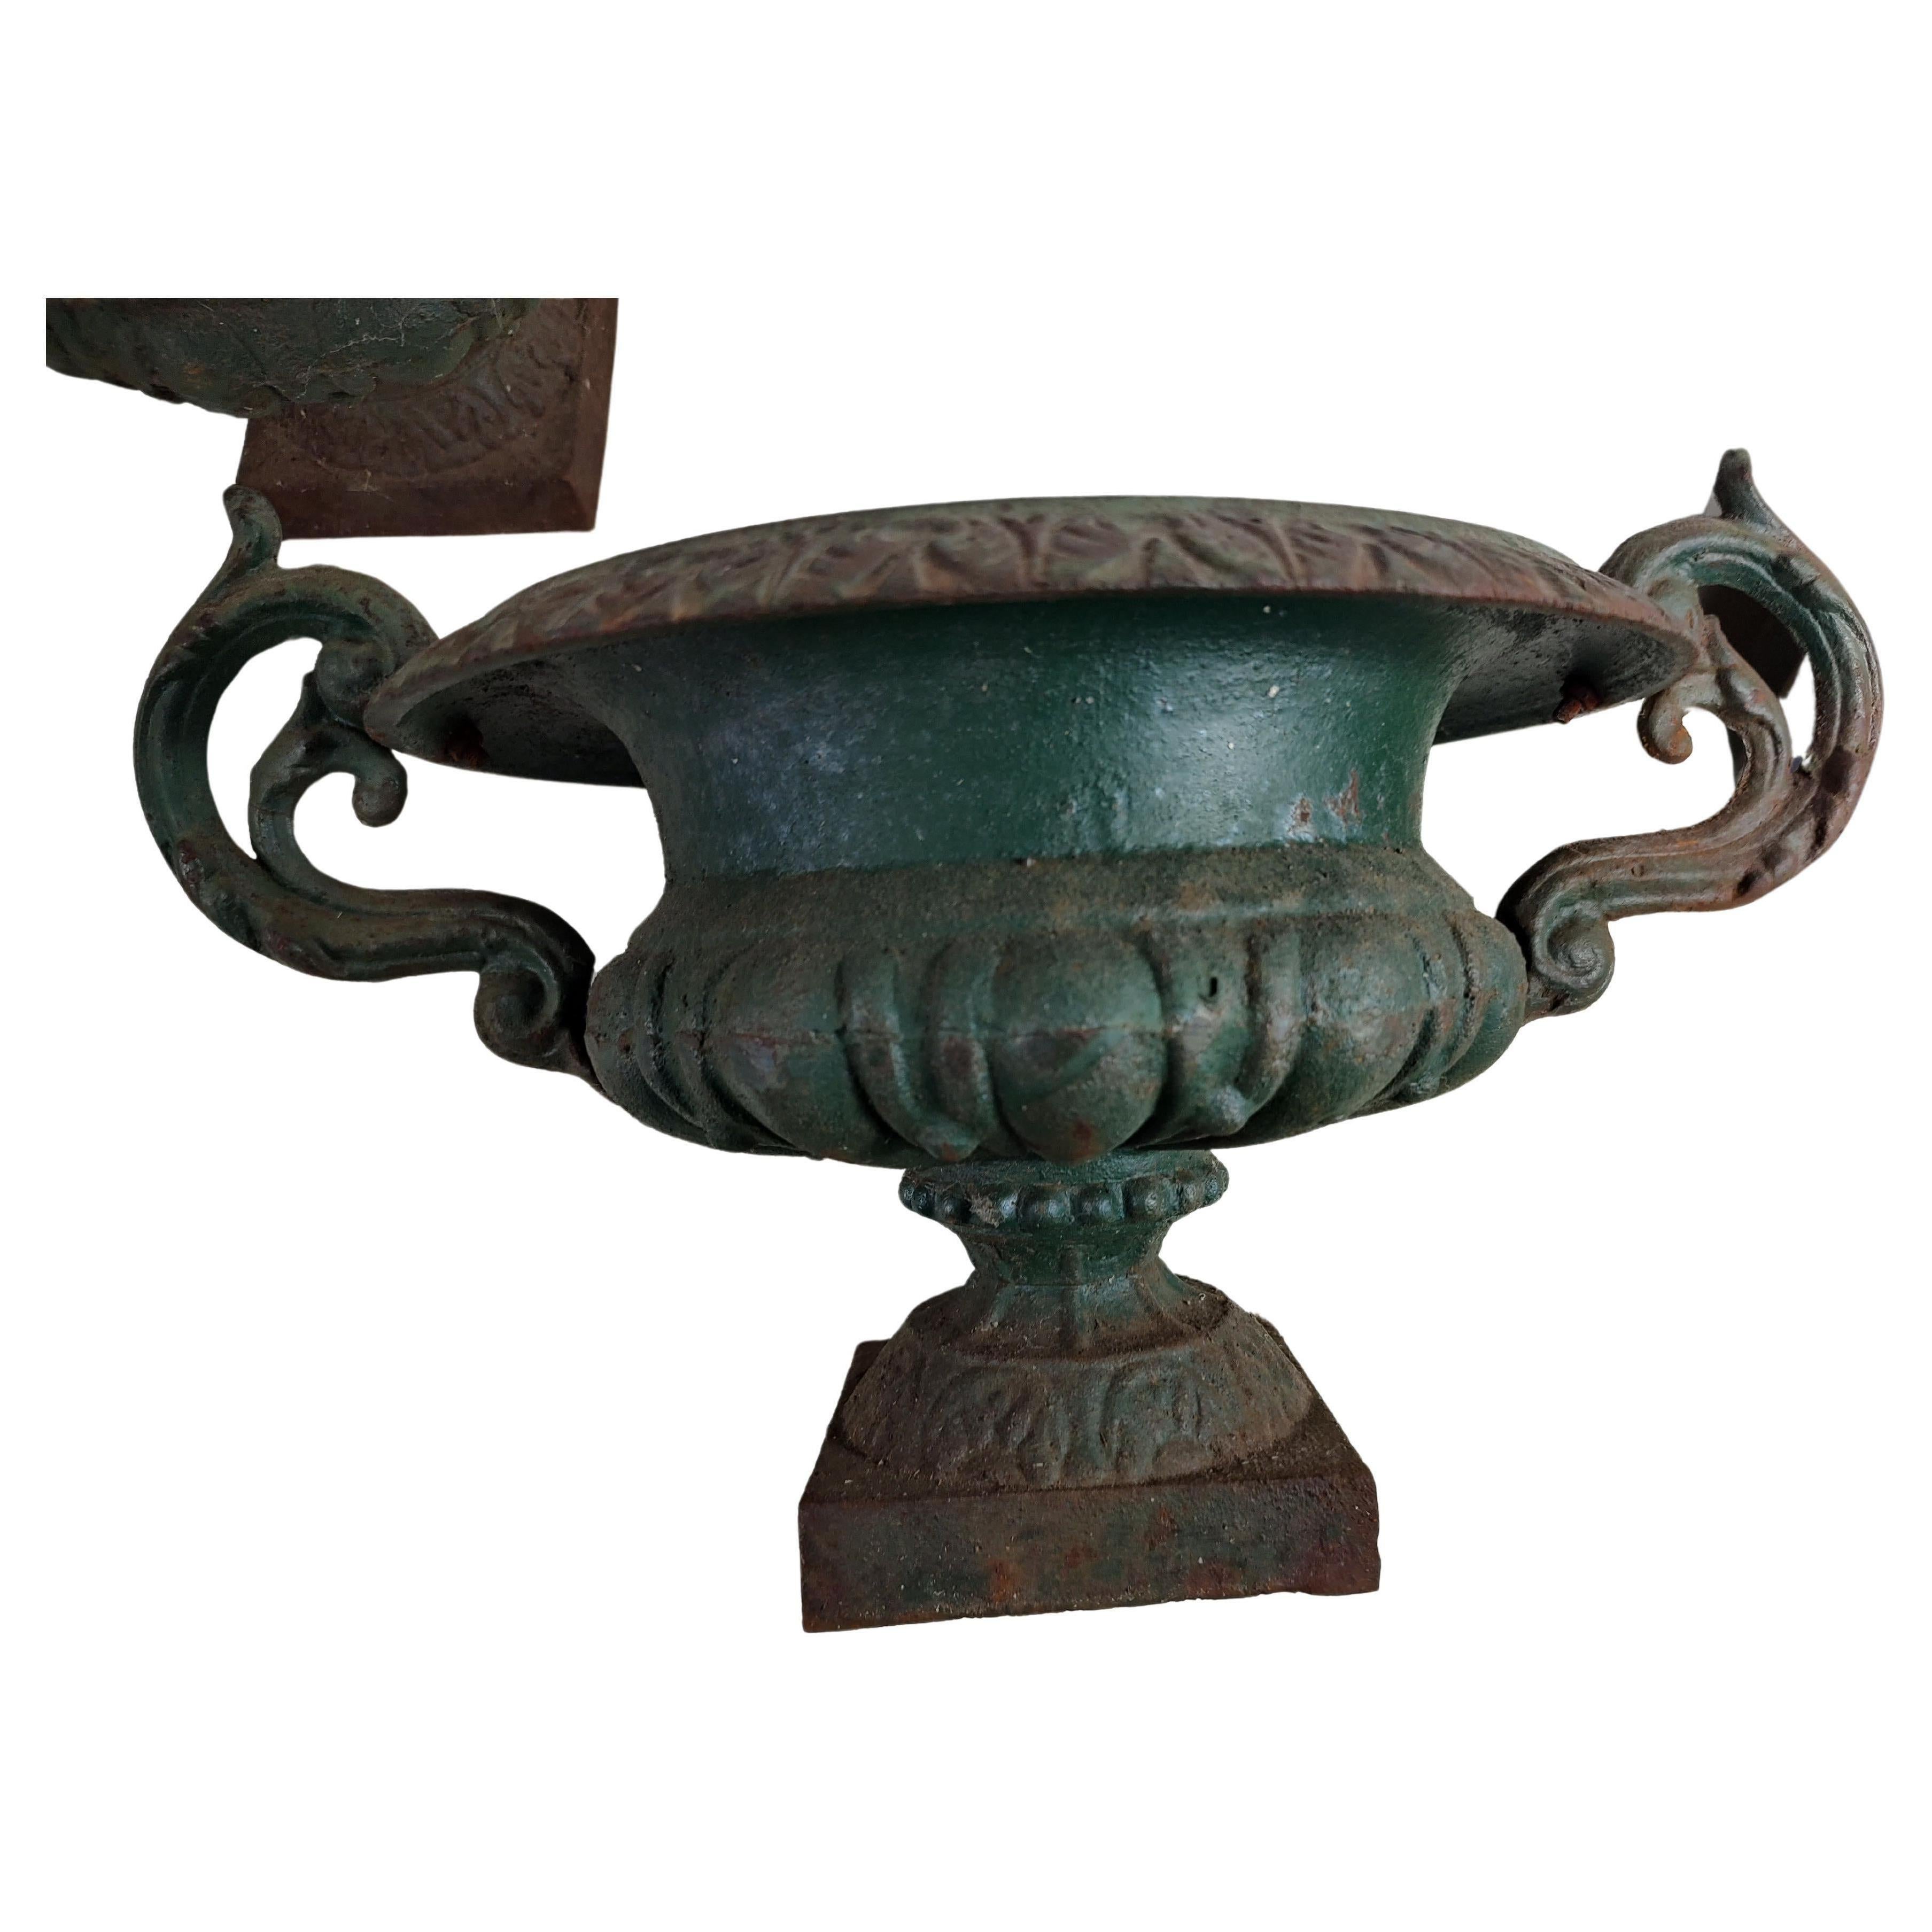 Simple and elegant petite pair of late Victorian cast iron garden urns in old green paint. In excellent vintage condition with minimal wear, no cracks or breaks no bad repairs, just lots of old patina and some rust. Priced and sold by the pair.